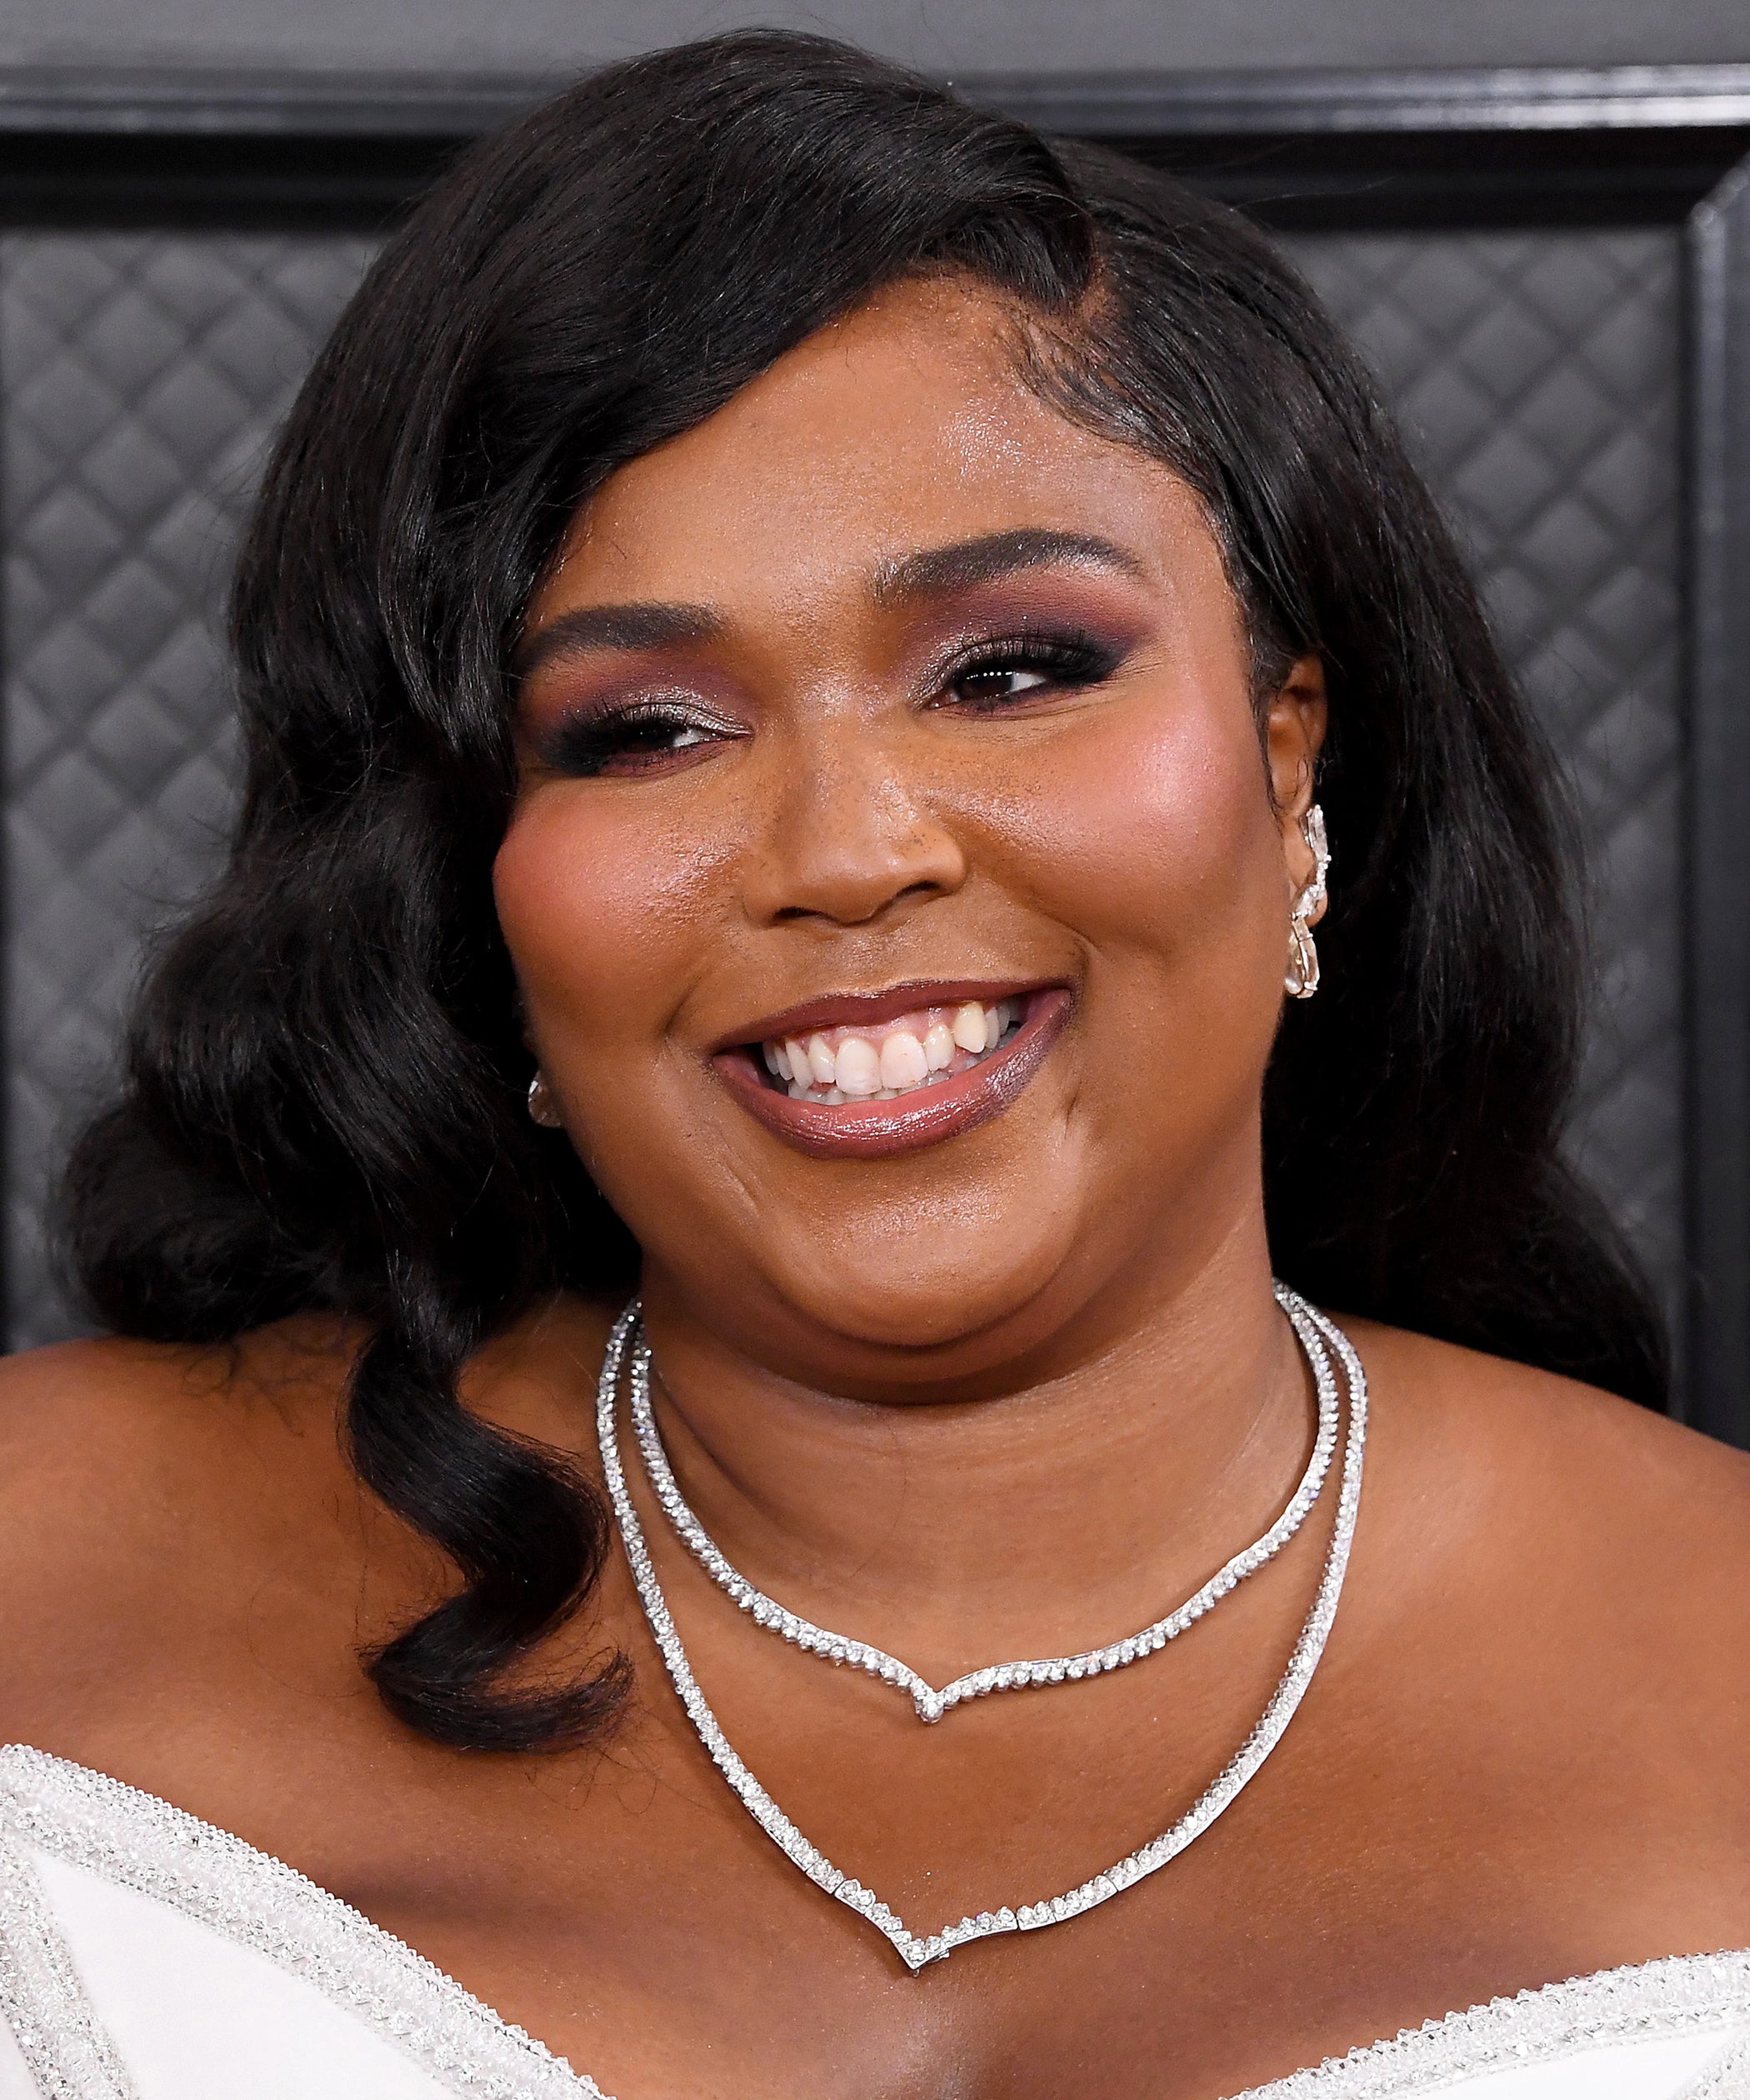 Lizzo Biography, Age, Family, Height, Marriage, Salary, Net Worth